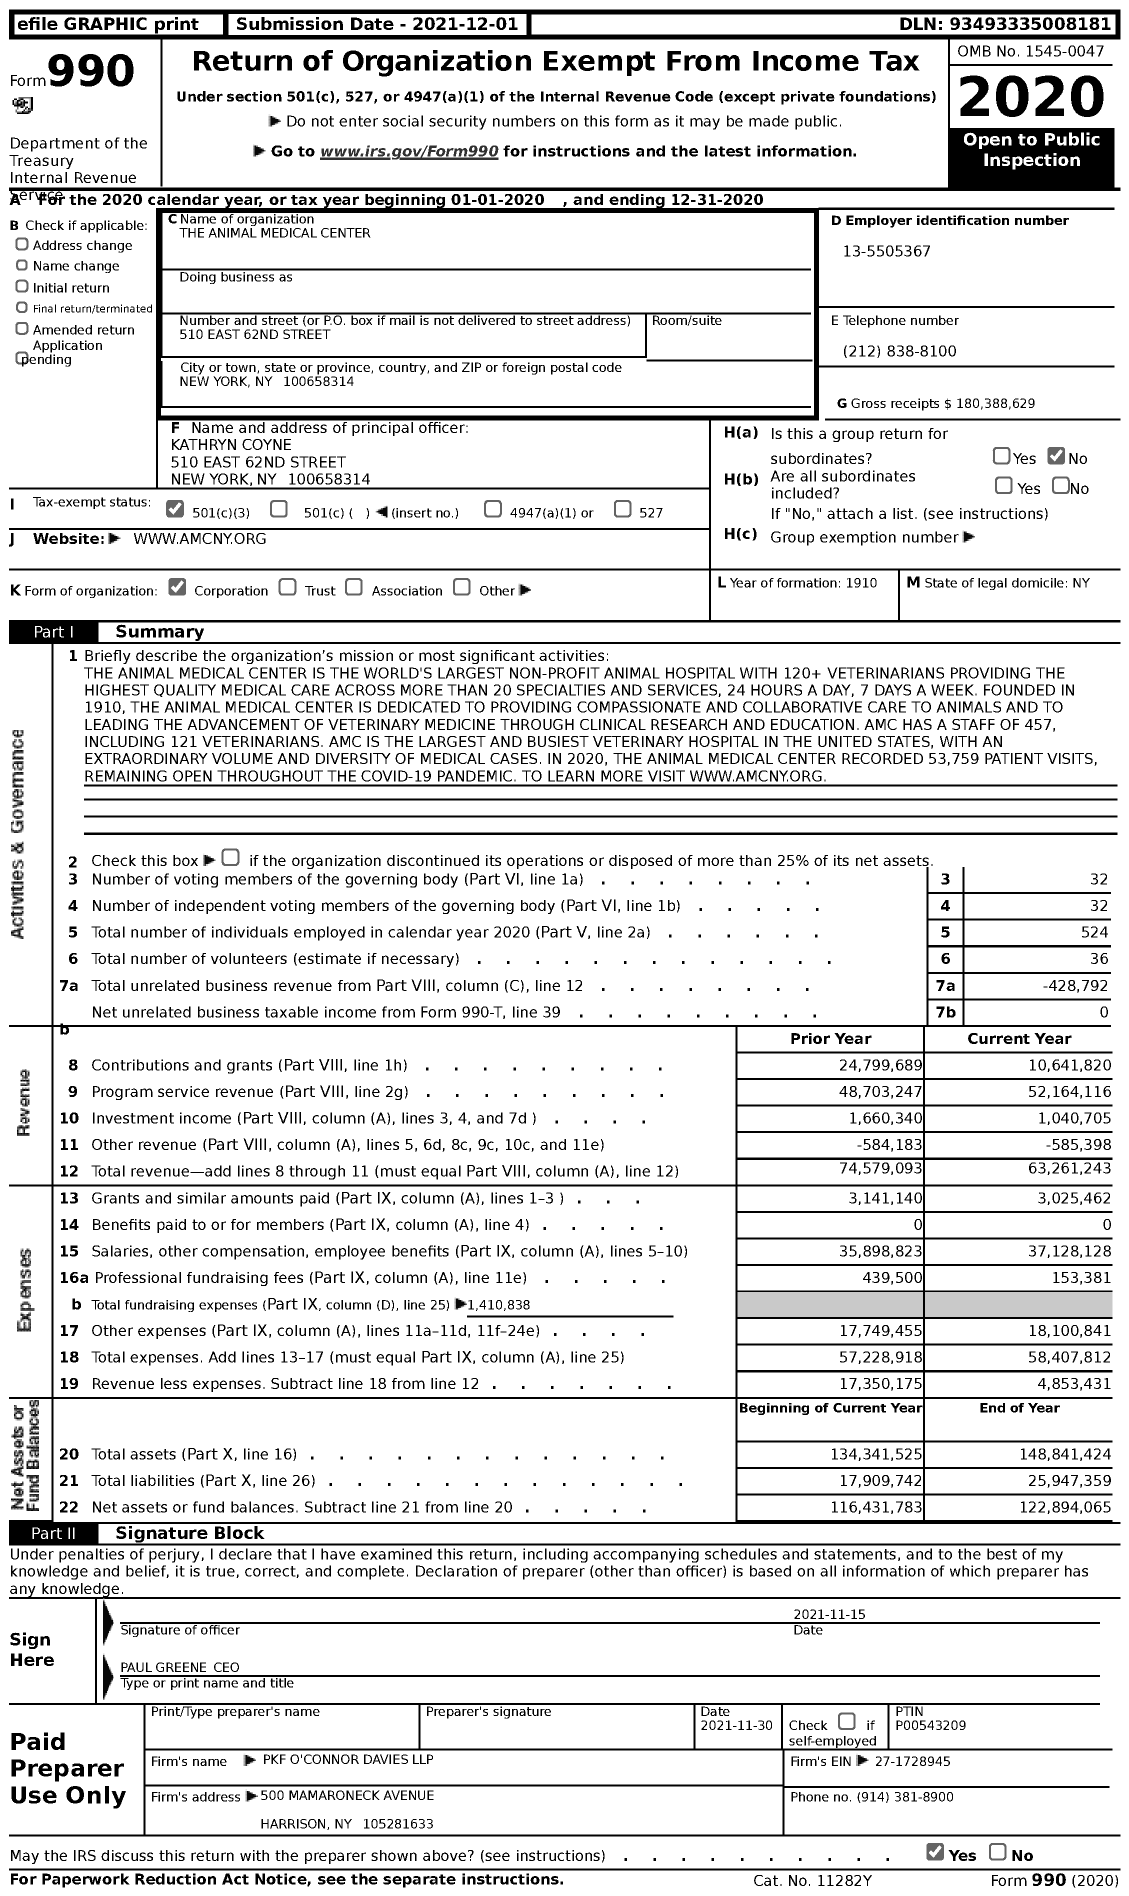 Image of first page of 2020 Form 990 for Stephen and Christine Schwarzman Animal Medical Center (AMC)